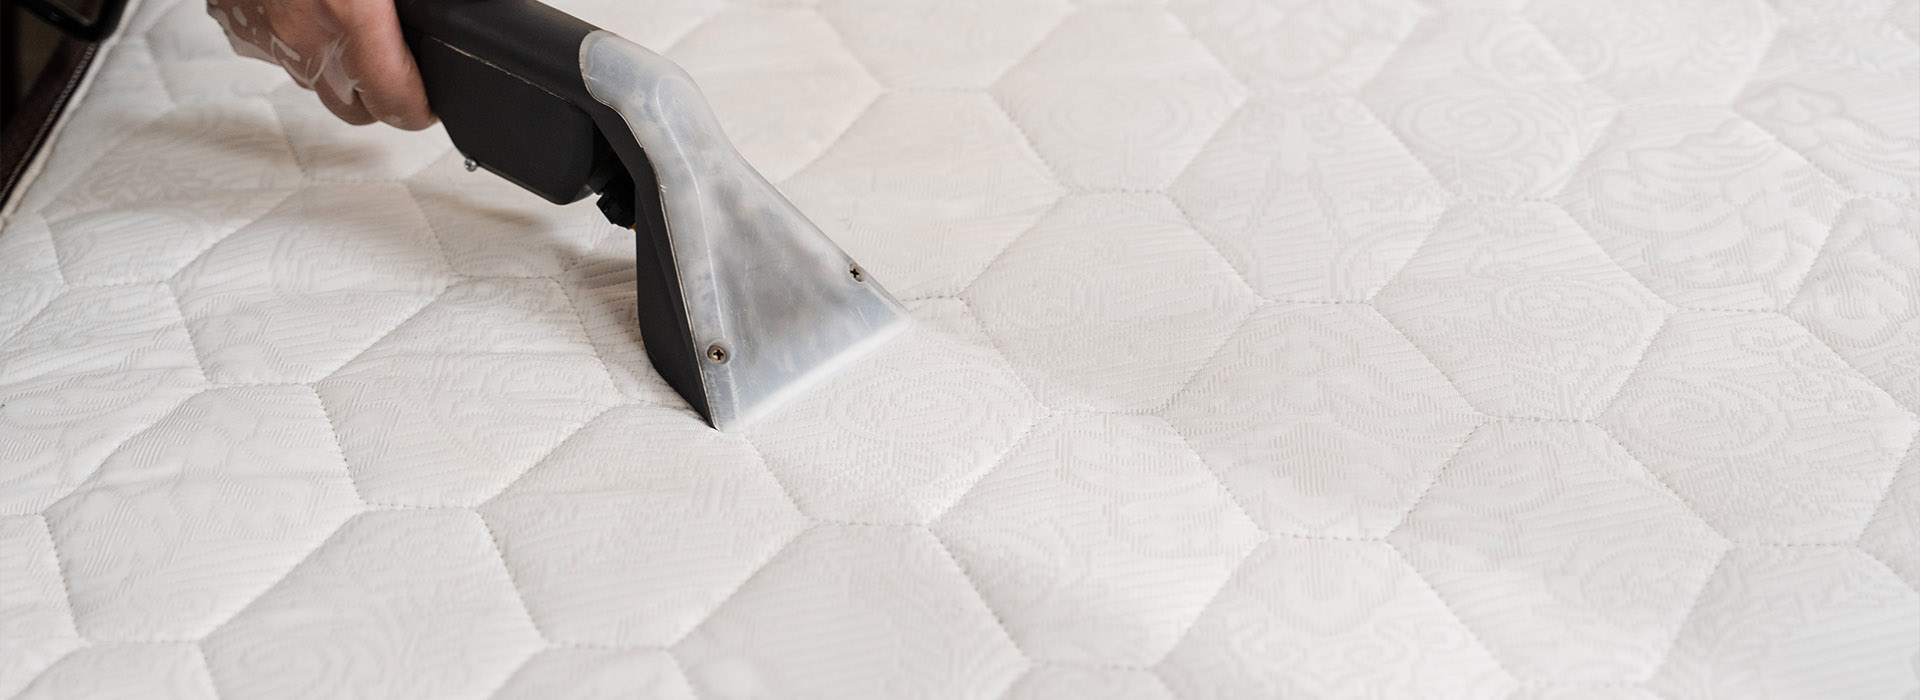 Effective Mattress Cleaning for a Restful Sleep